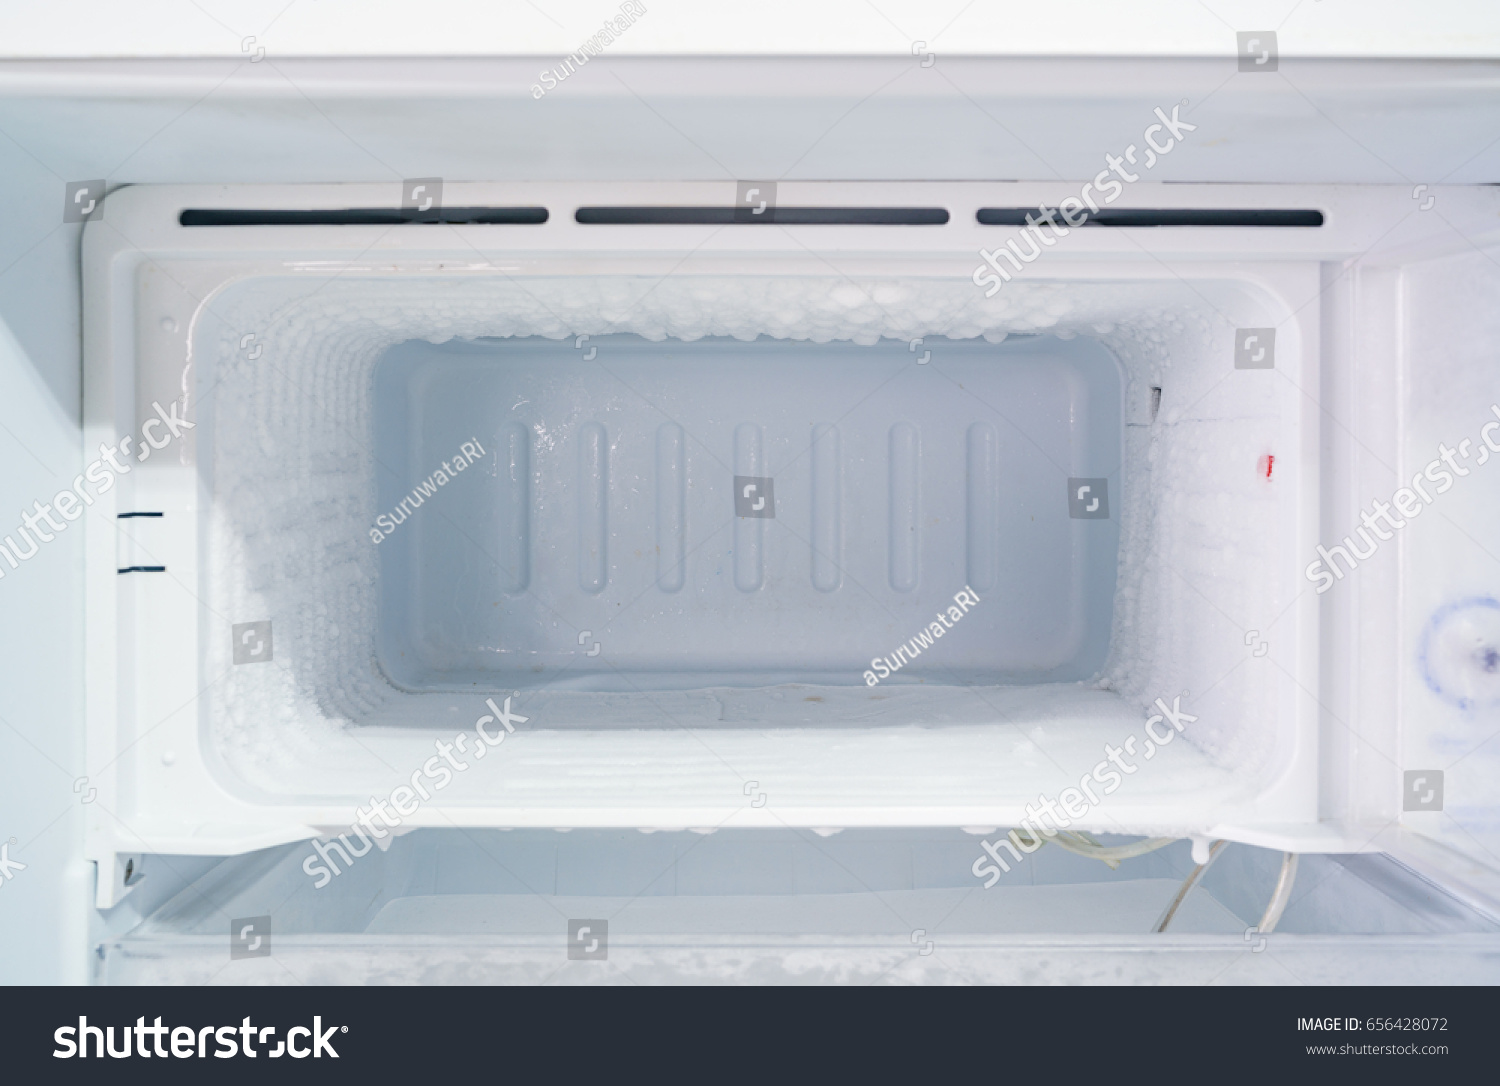 empty freezer of a refrigerator - Ice buildup on the inside of a freezer walls.  #656428072